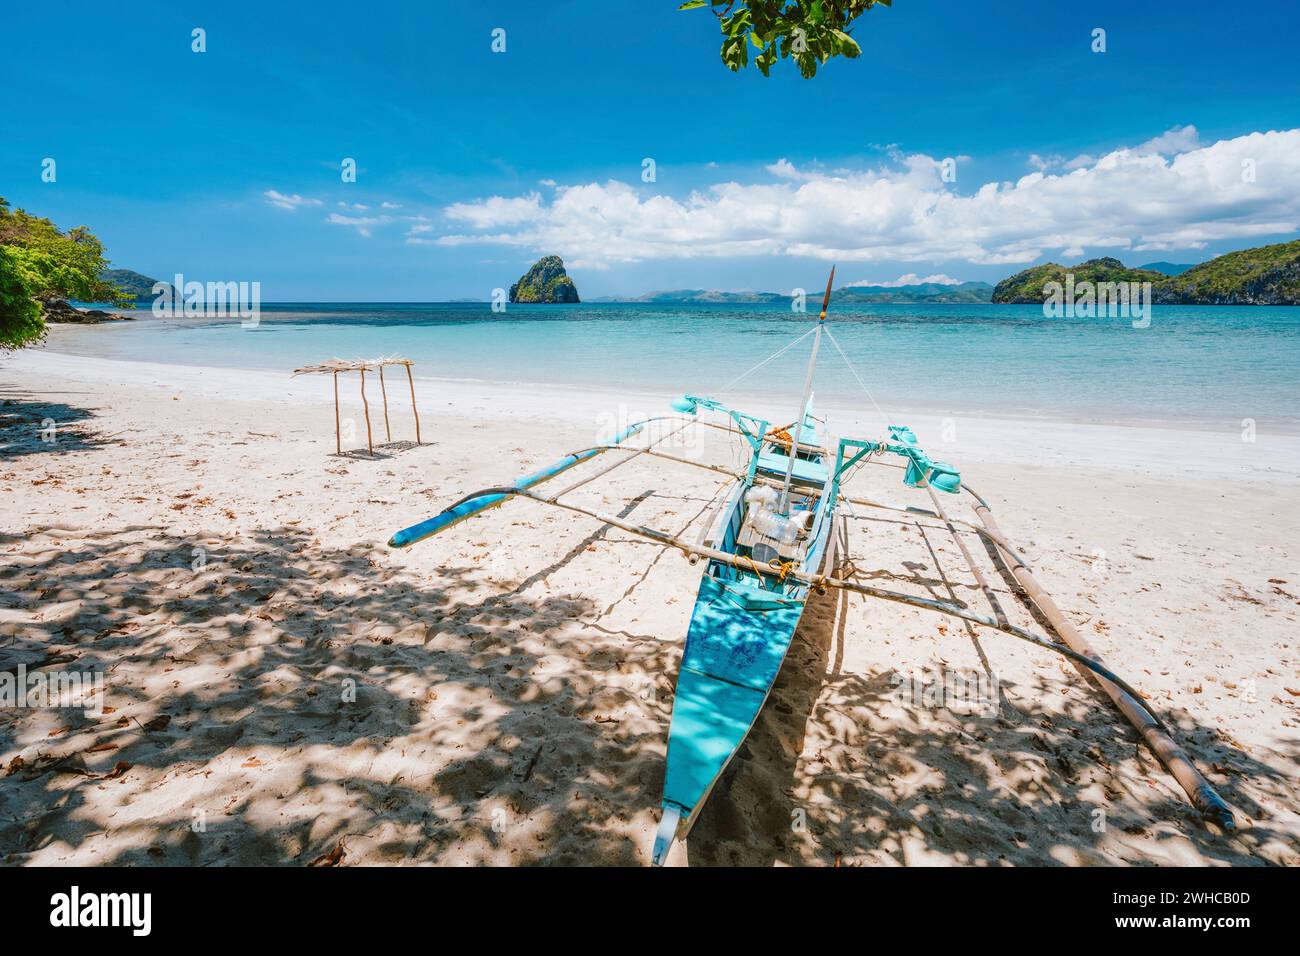 Holiday vibes. Traditional fishermen banca boat on sandy empty tropical beach. Blue ocean lagoon in background. El Nido, Philippines. Stock Photo